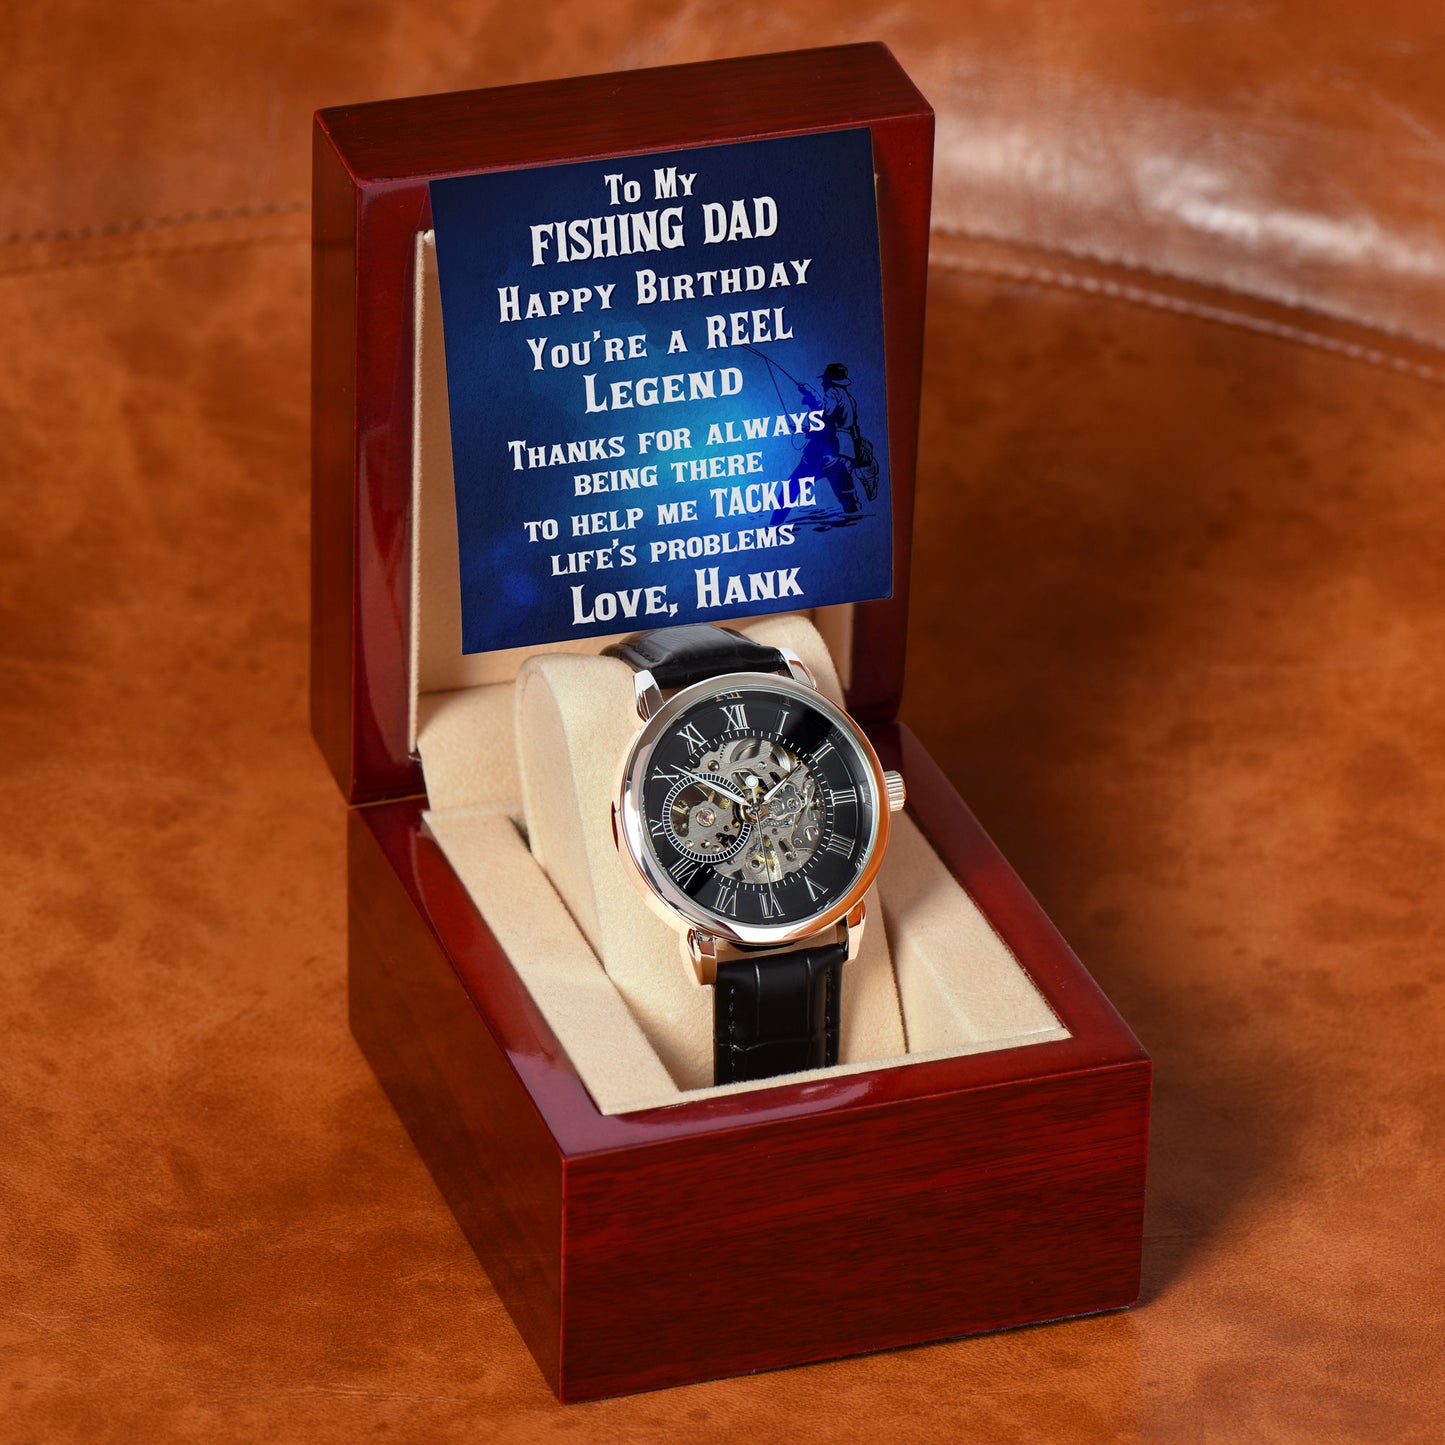 Fishing Dad Personalized Gift for a Fisherman Openwork Watch